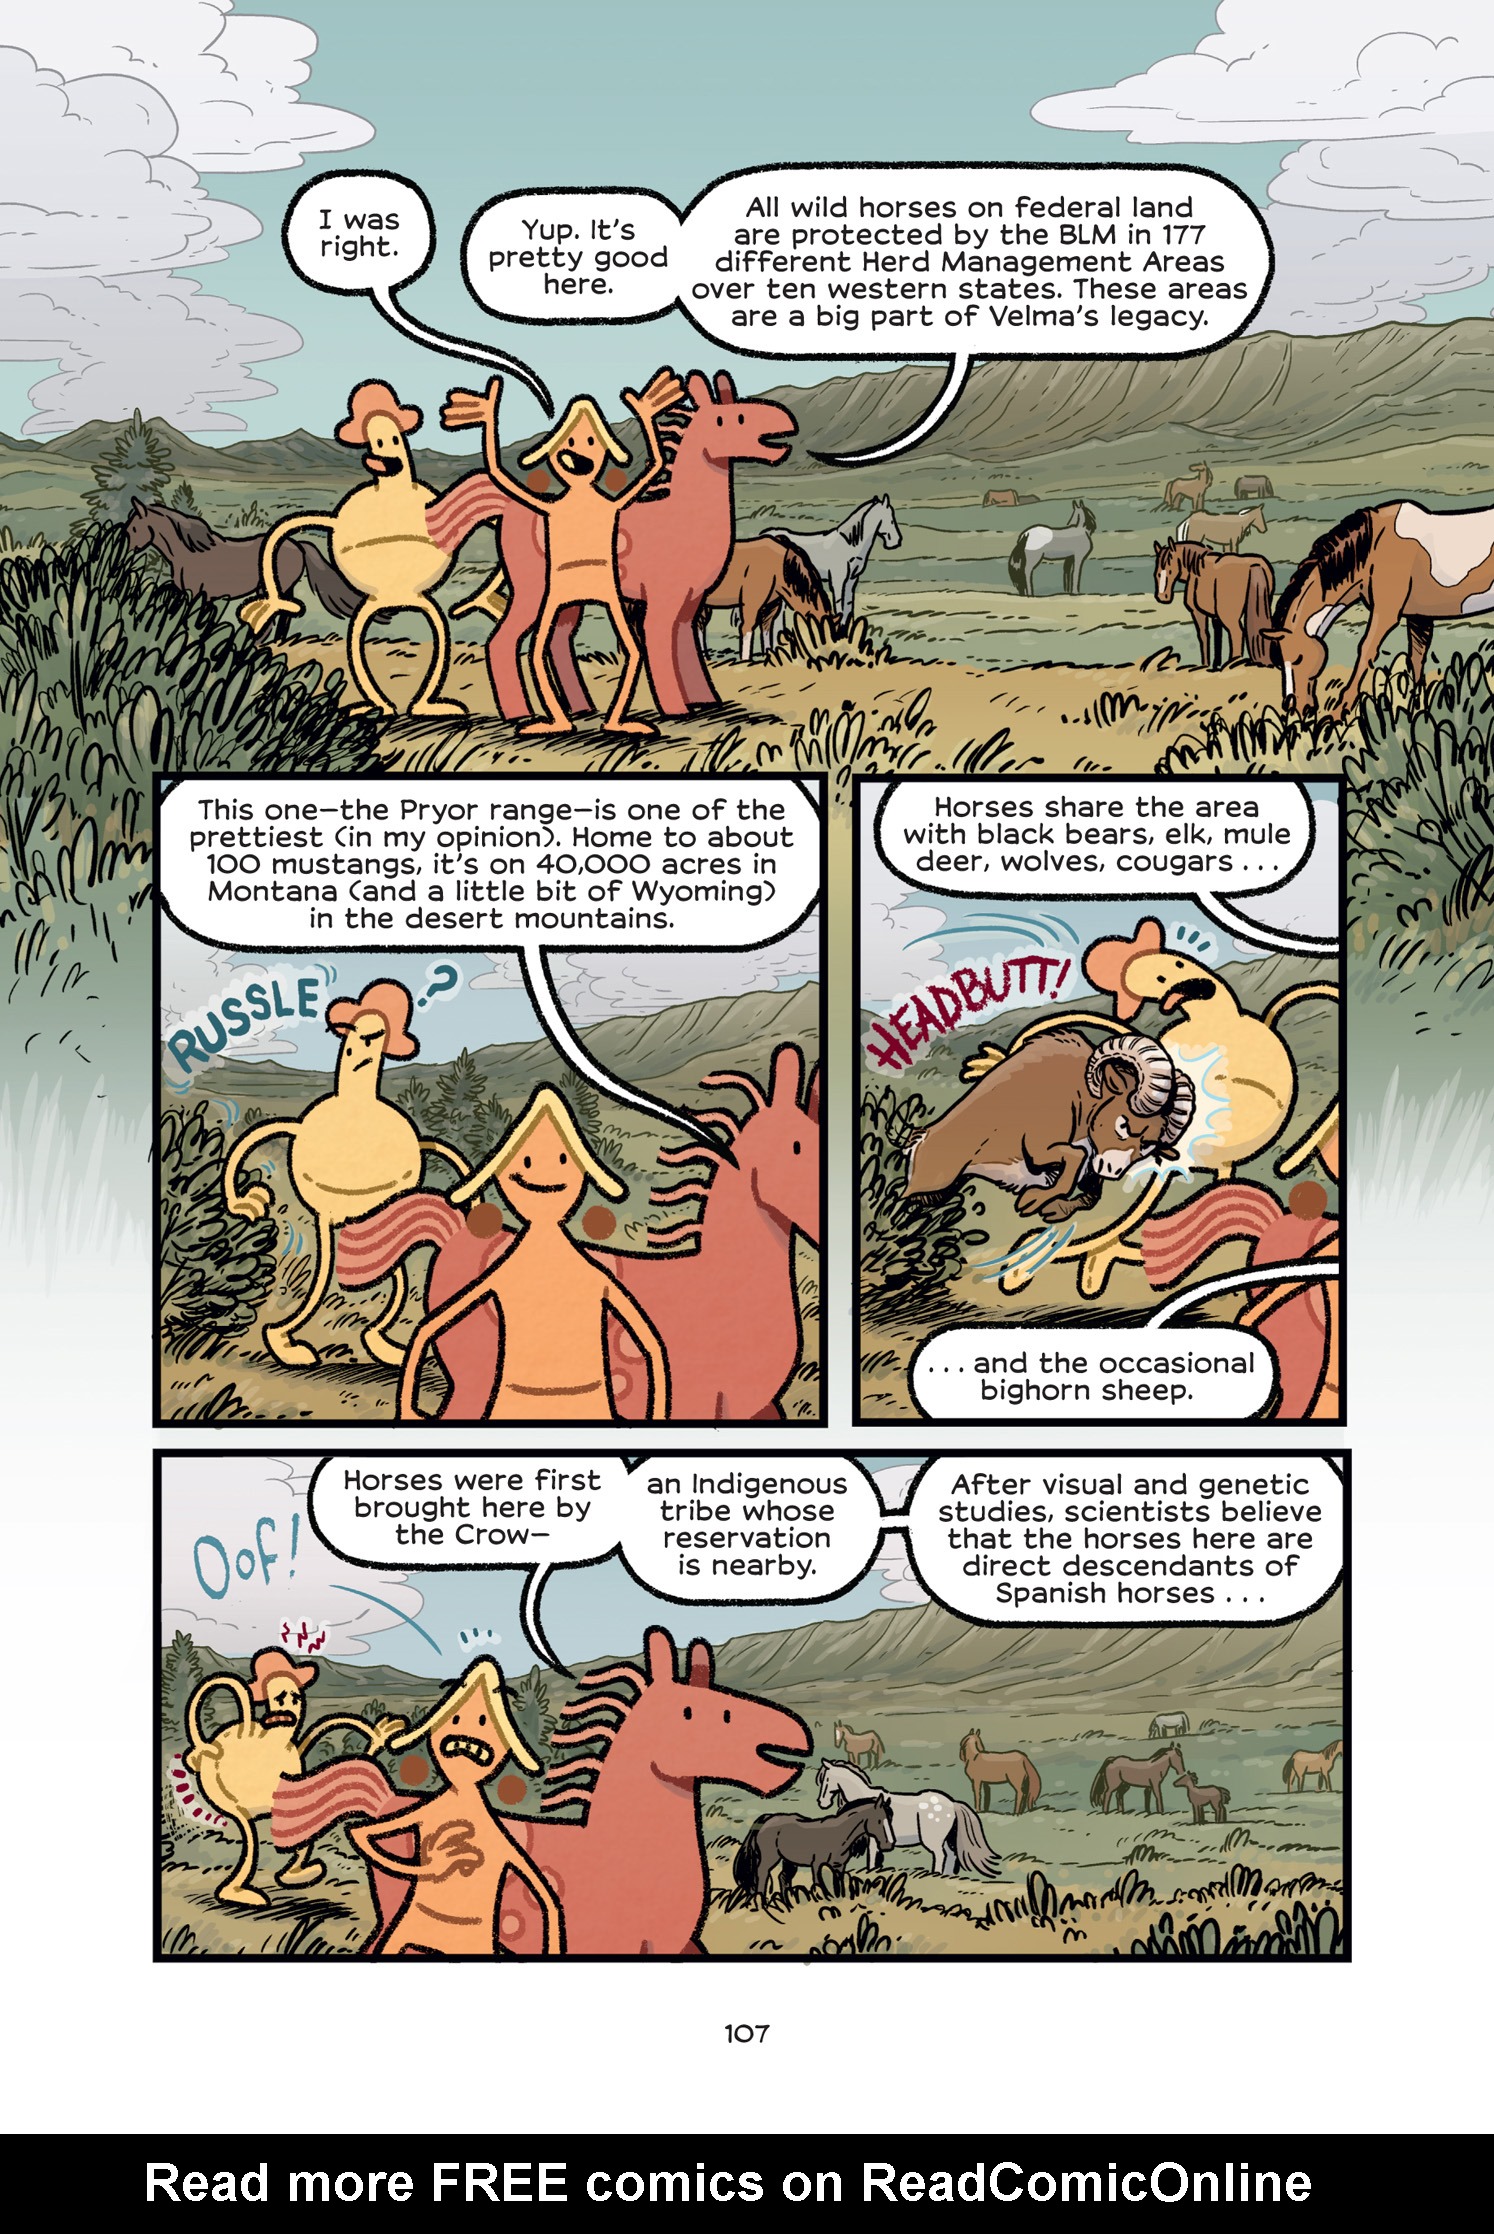 Read online History Comics comic -  Issue # The Wild Mustang - Horses of the American West - 100